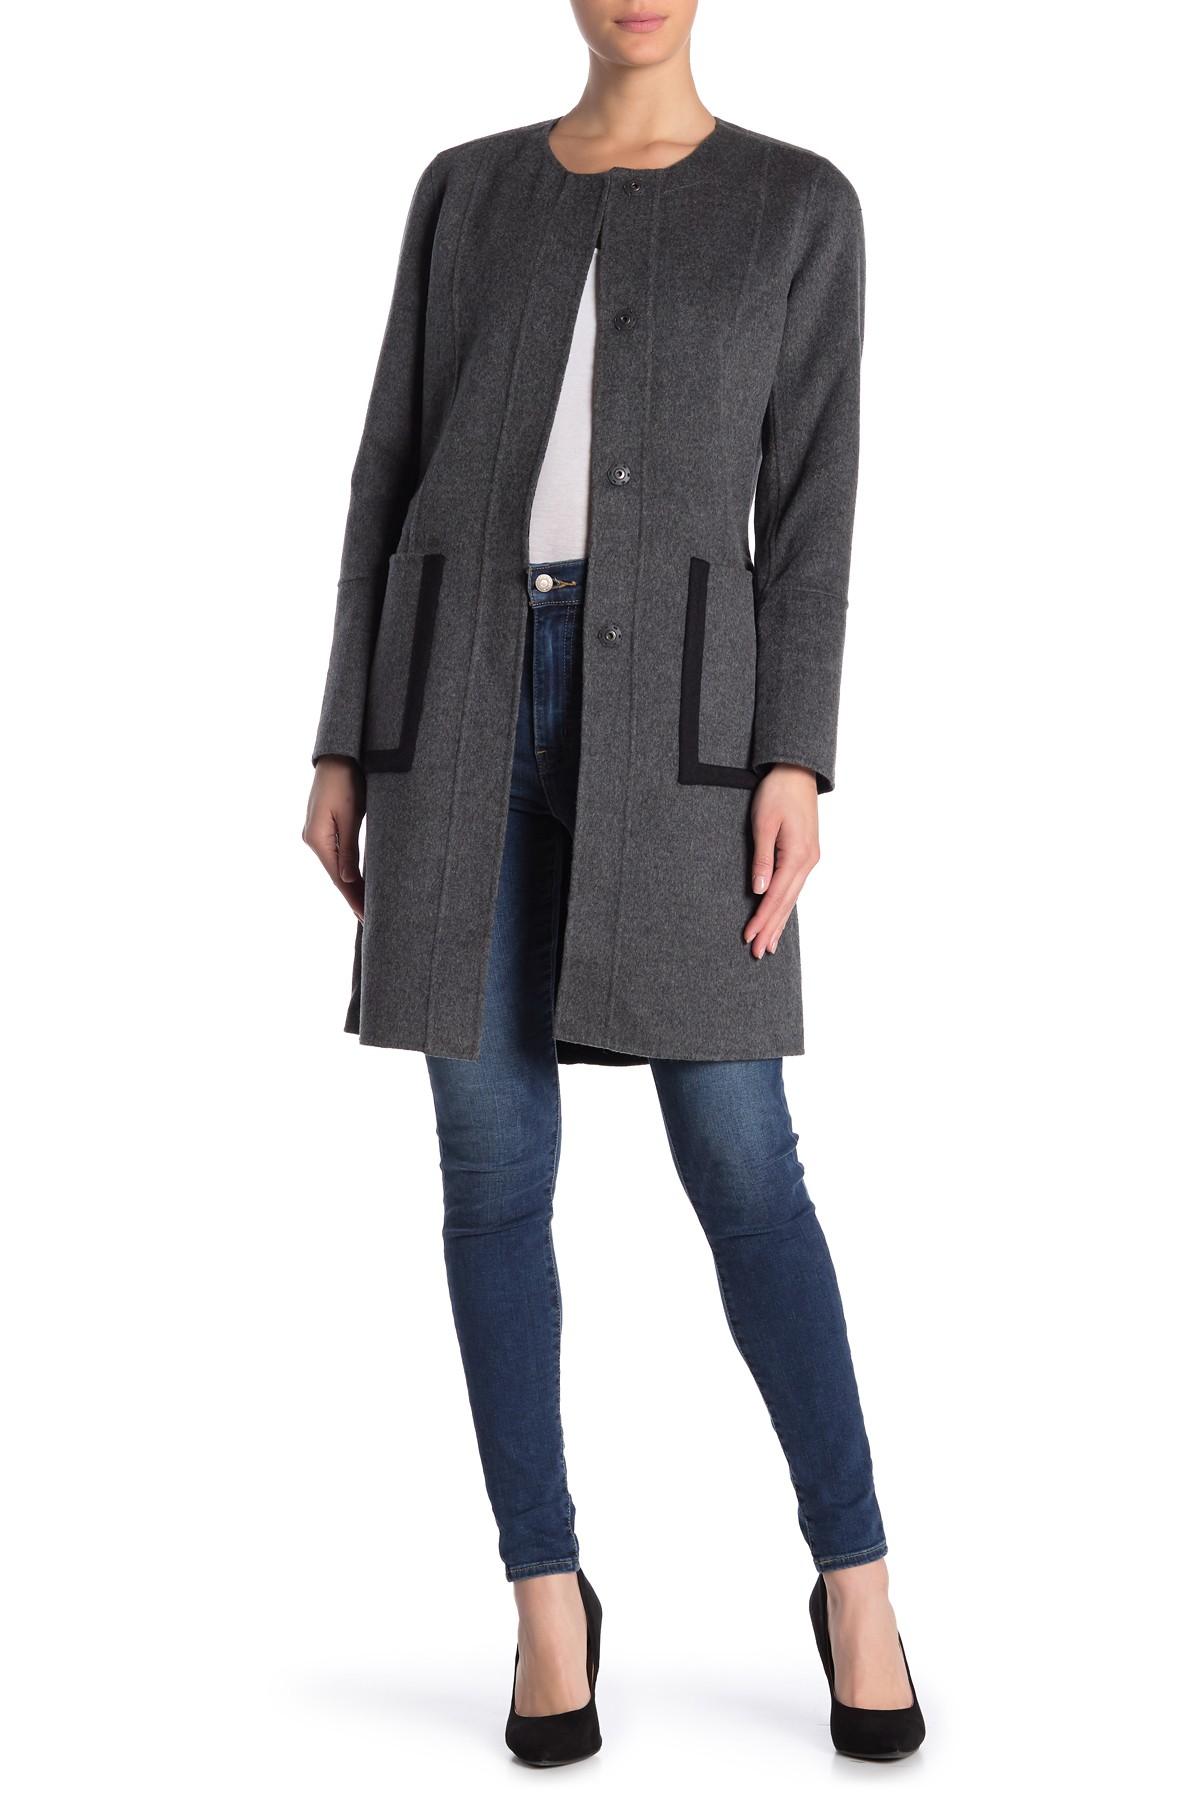 Kinross Cashmere Reversible Cashmere & Wool Snap Coat in Black - Lyst